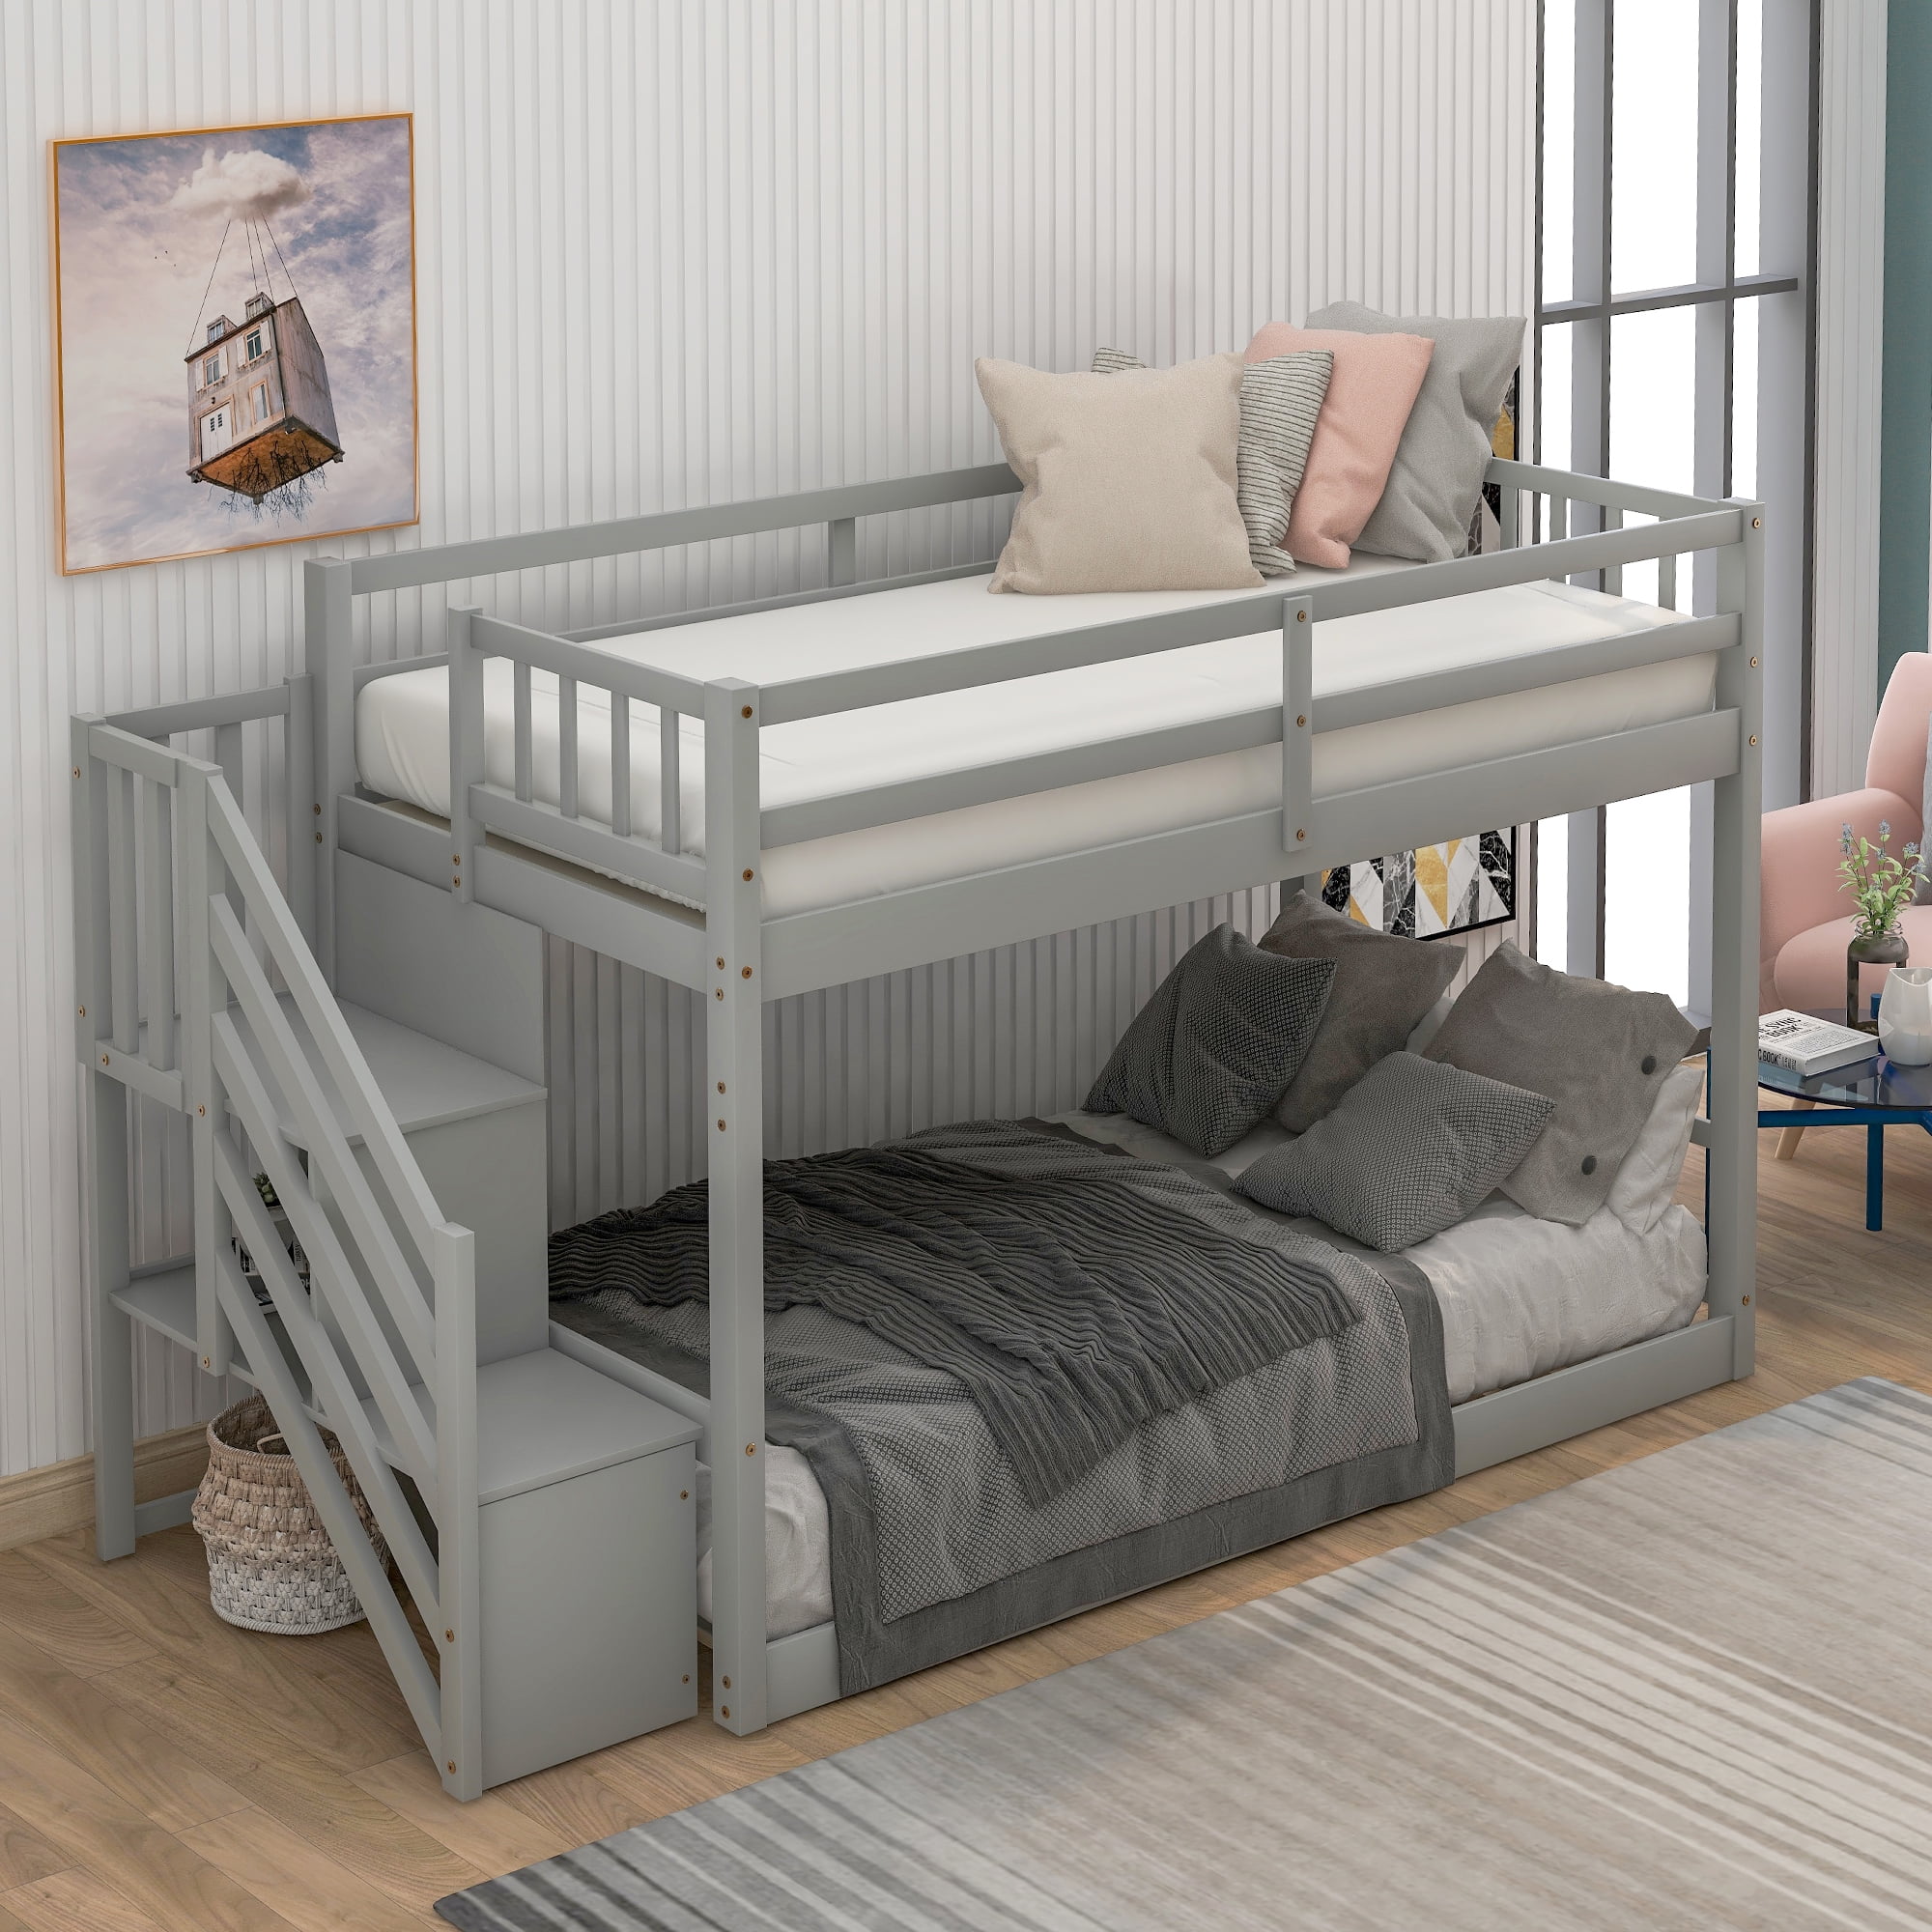 Euroco Wood Twin Over Floor Bunk, Gray Bunk Beds With Stairs